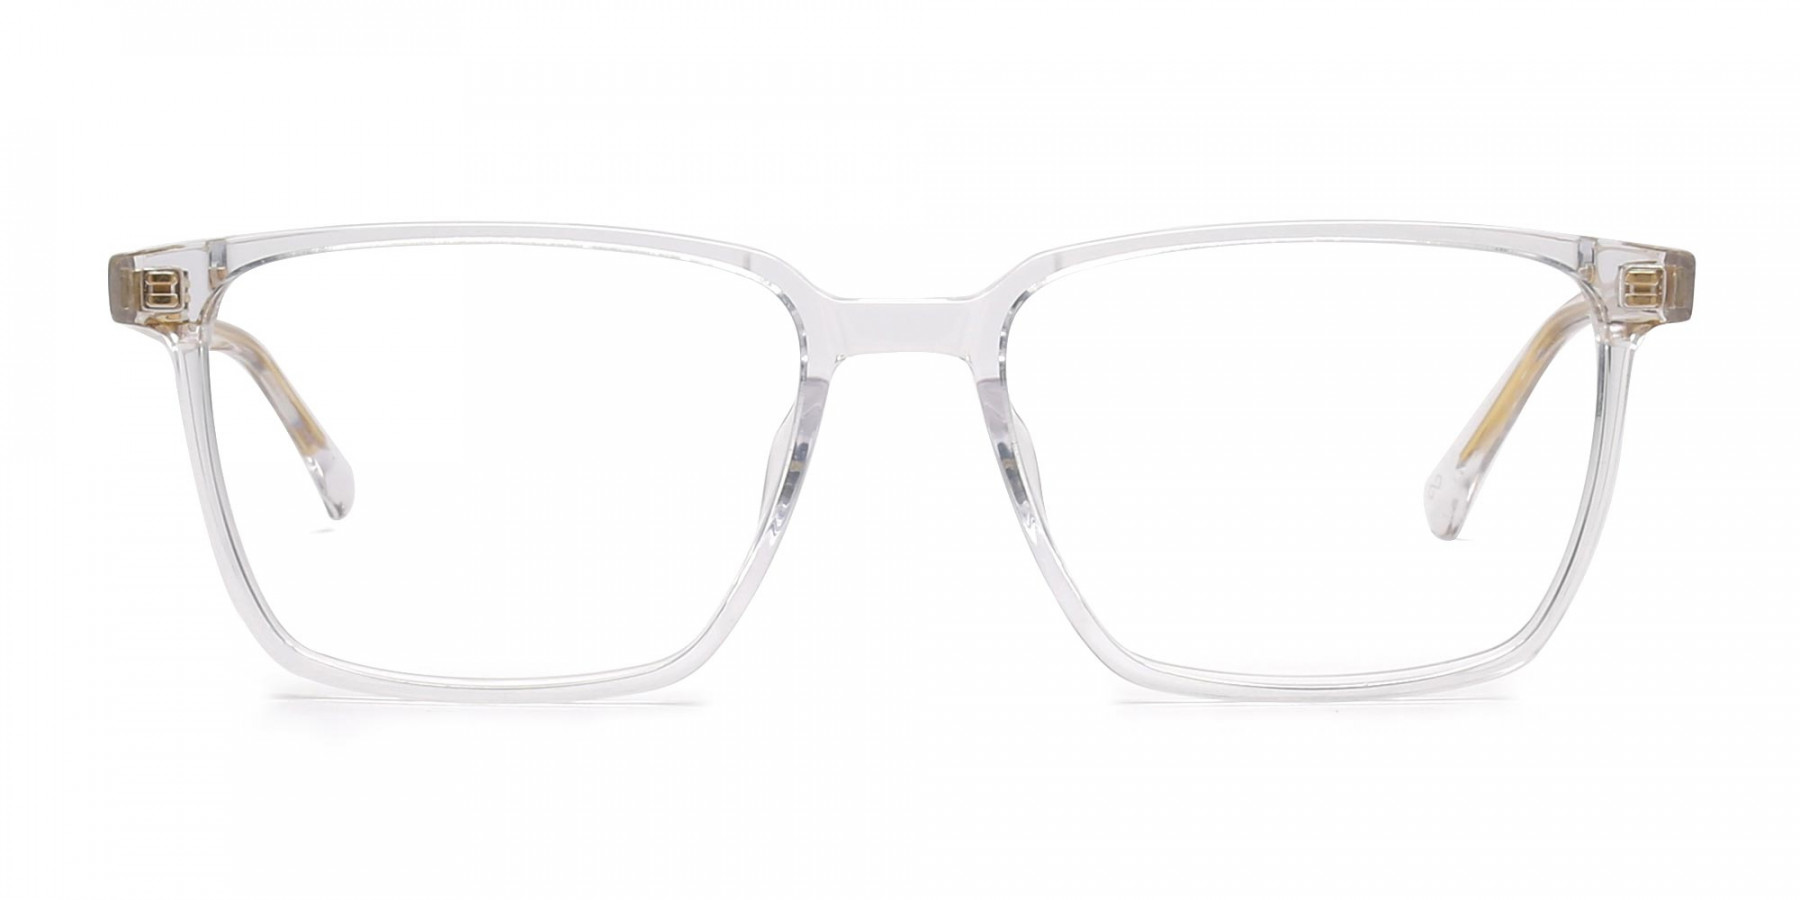 CARLTON 3 - Clear Fashion Glasses - Free 24 hour Dispatch | Specscart.®